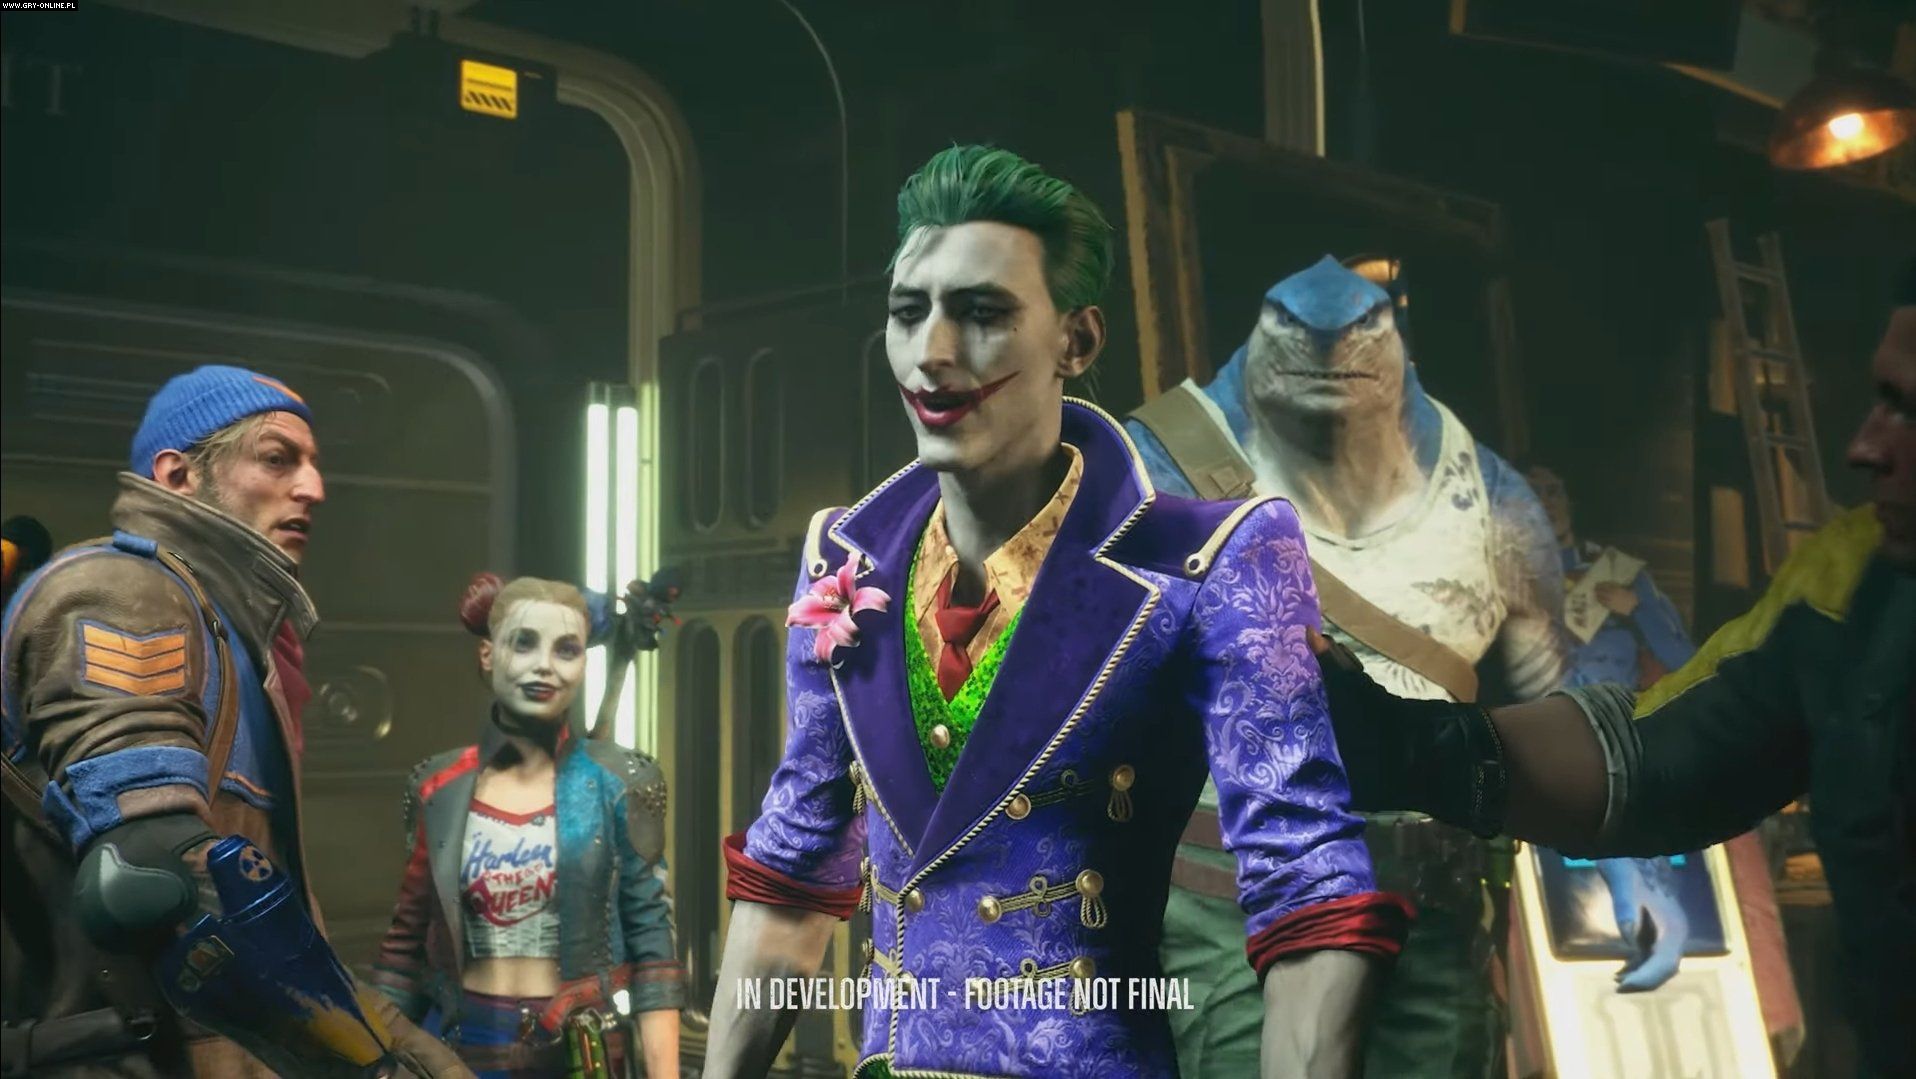 The Joker in Suicide Squad Only After Release. Developers Share Roadmap ...